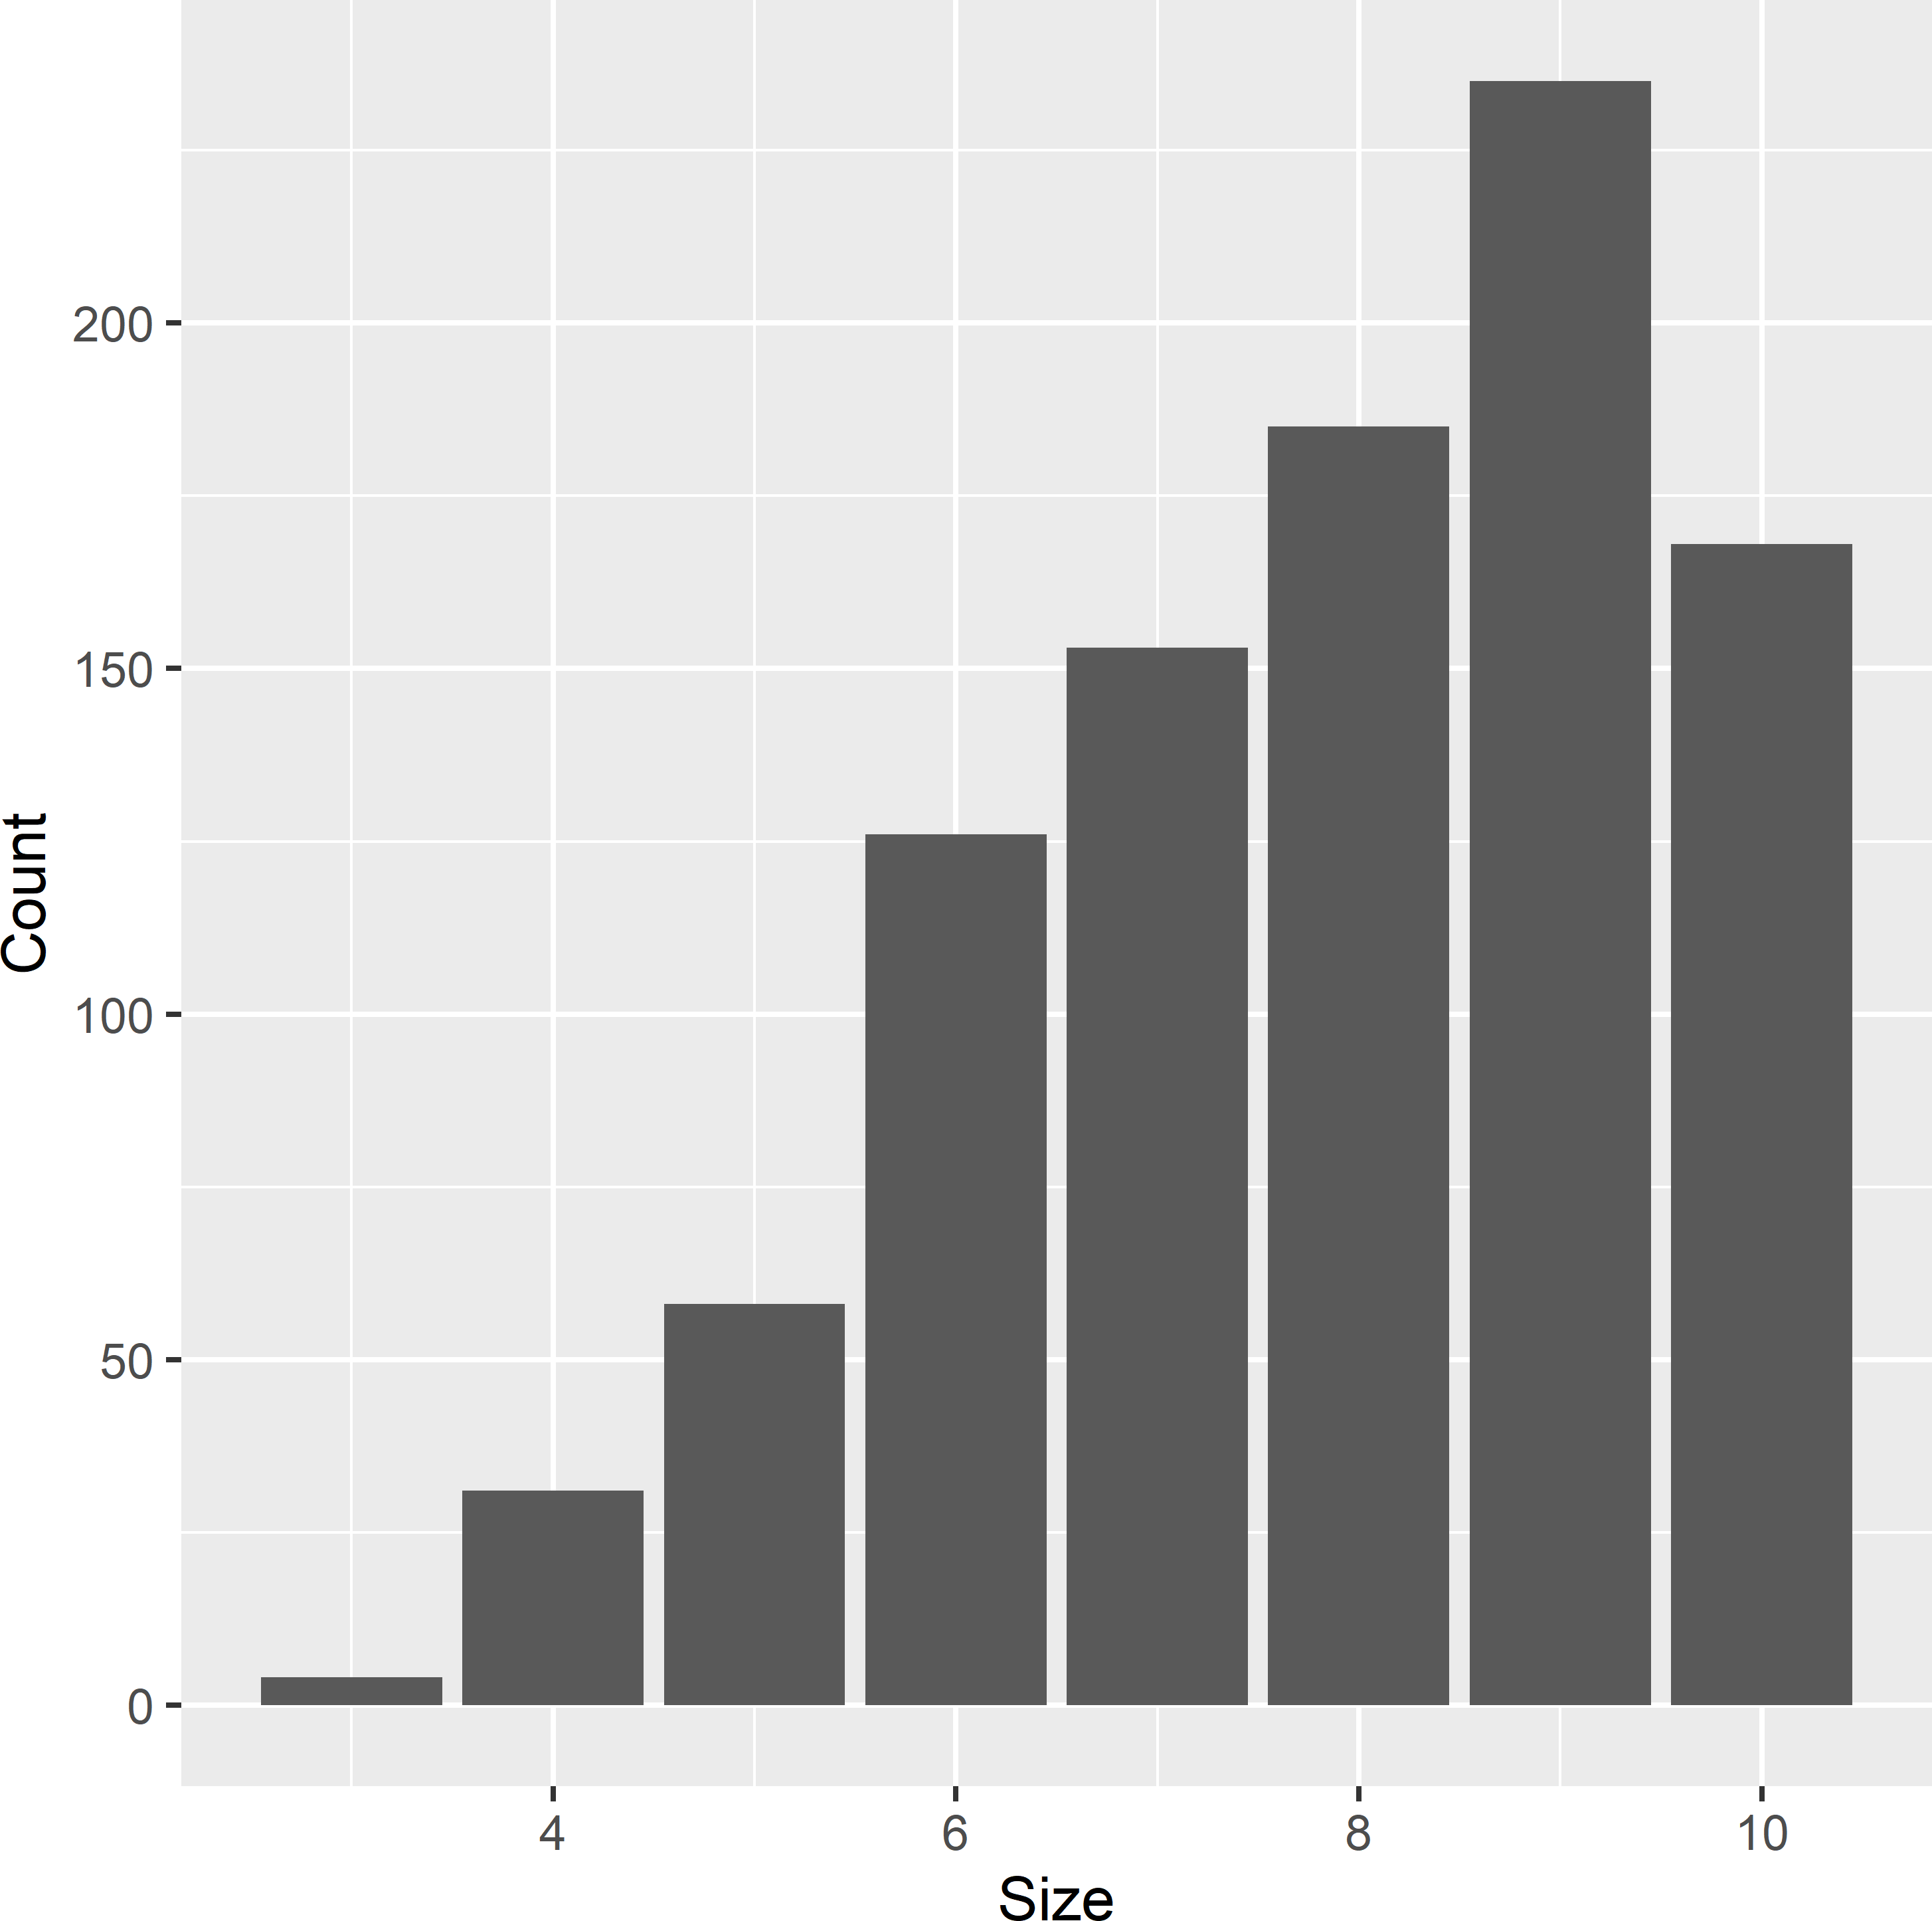 Frequency distribution of the size of clusters in Voorst. Clusters are E-W oriented transects within zones, with a spacing of 100 m between units.